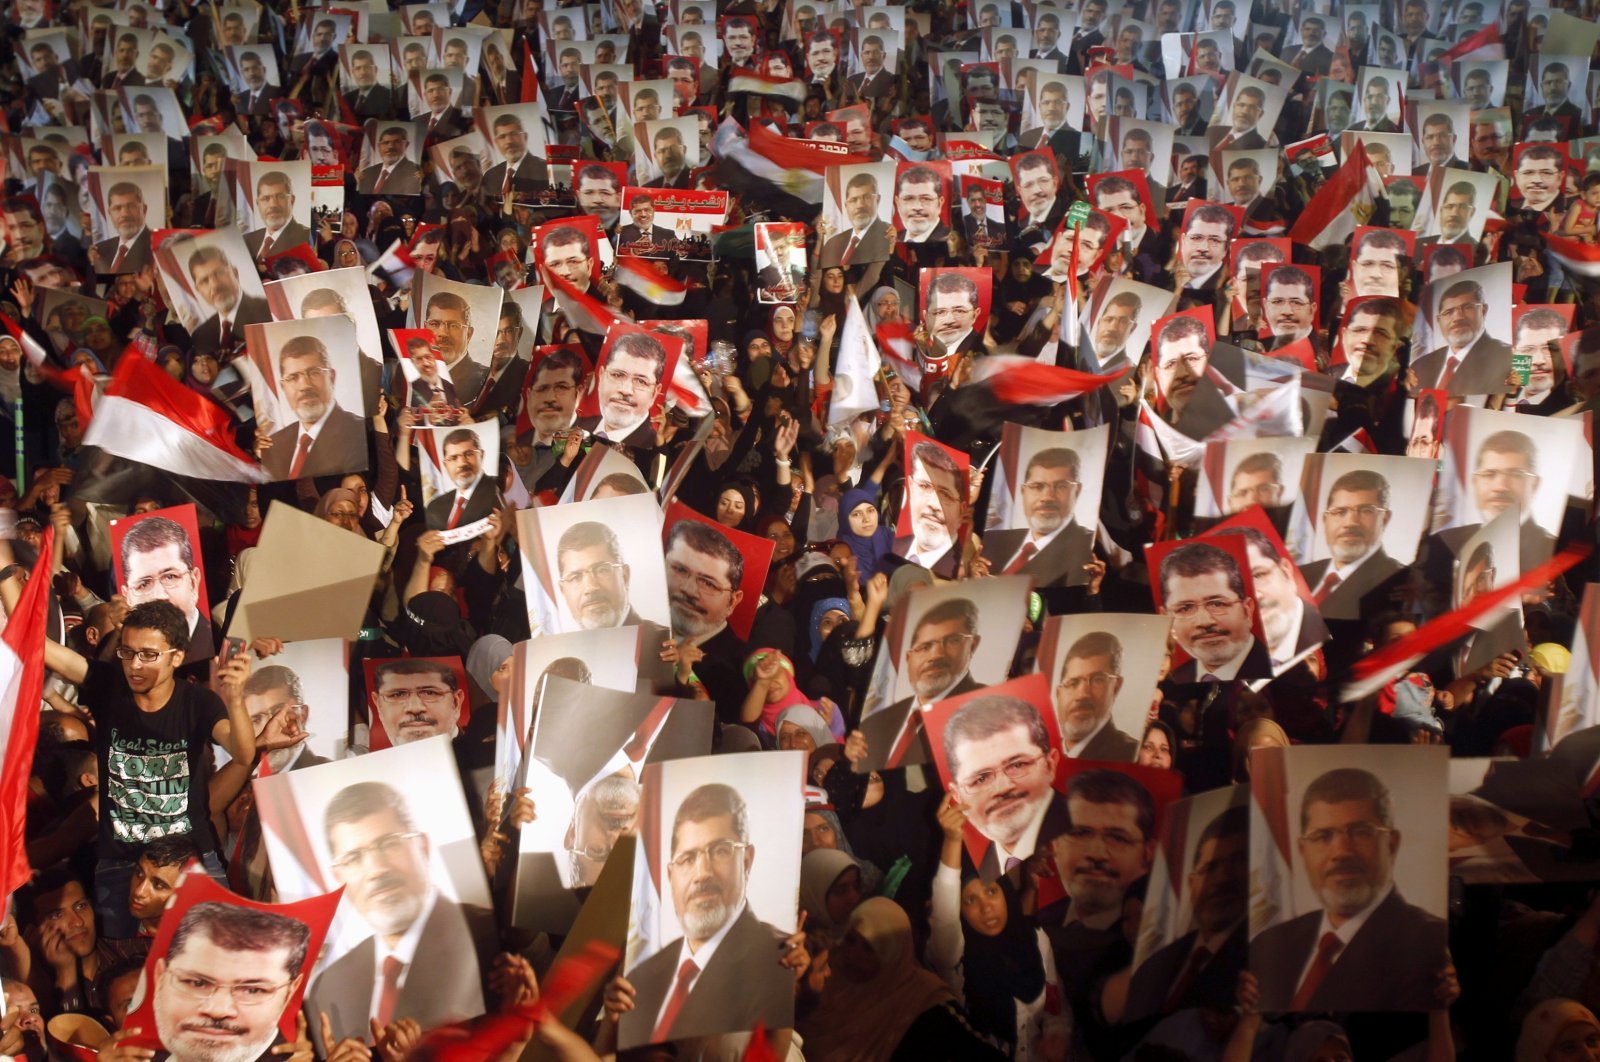 Members of the Muslim Brotherhood and supporters of then-Egyptian President Mohamed Morsi hold pictures of him as they react after the Egyptian army&#039;s statement was read out on state TV, at the Raba El-Adwyia mosque square in Cairo, Egypt, July 3, 2013. (Reuters File Photo)